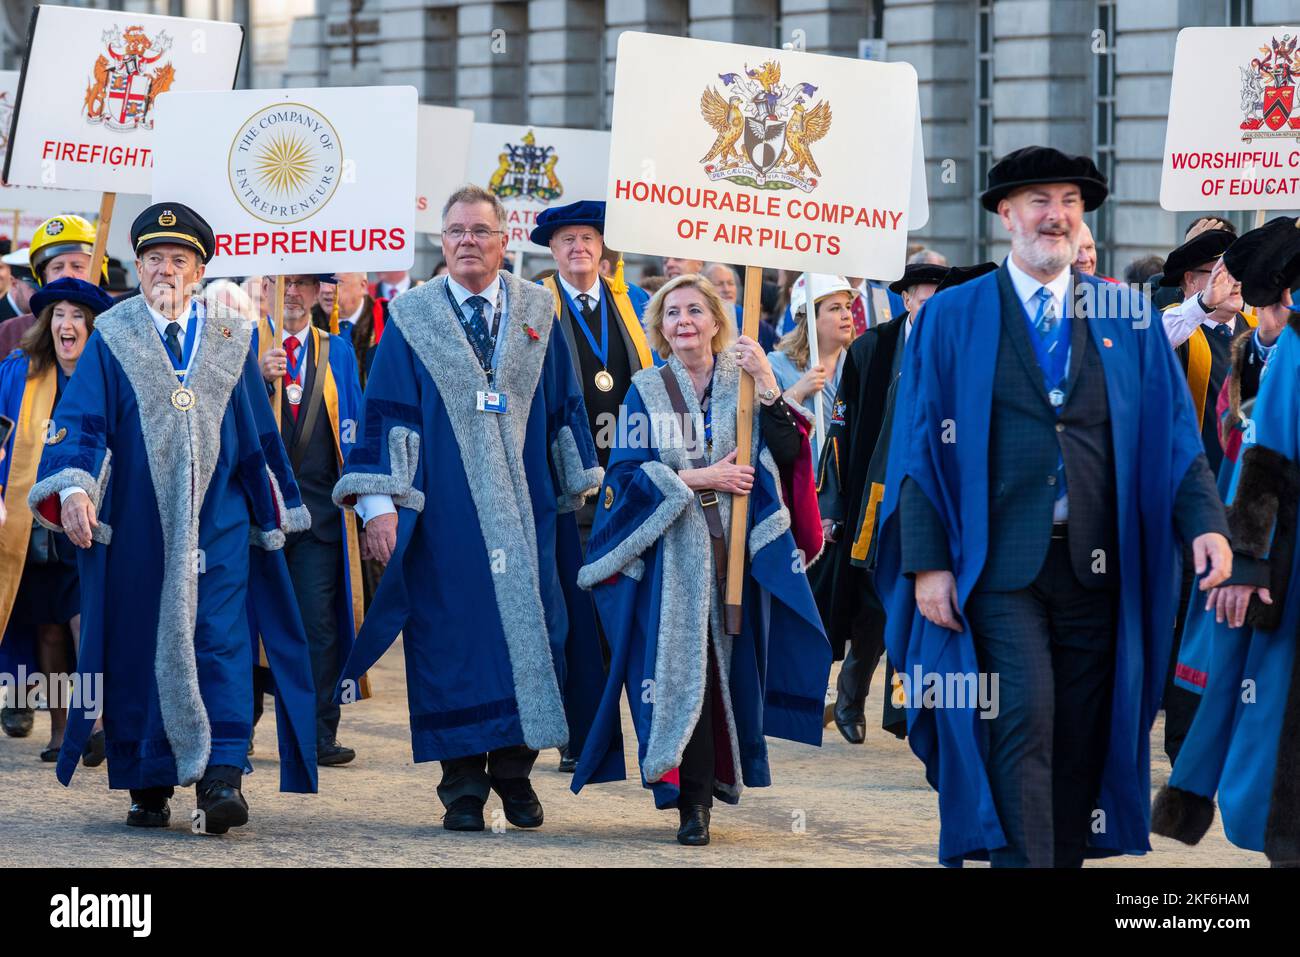 modern-livery-companies-groups-at-the-lord-mayor-s-show-parade-in-the-city-of-london-uk